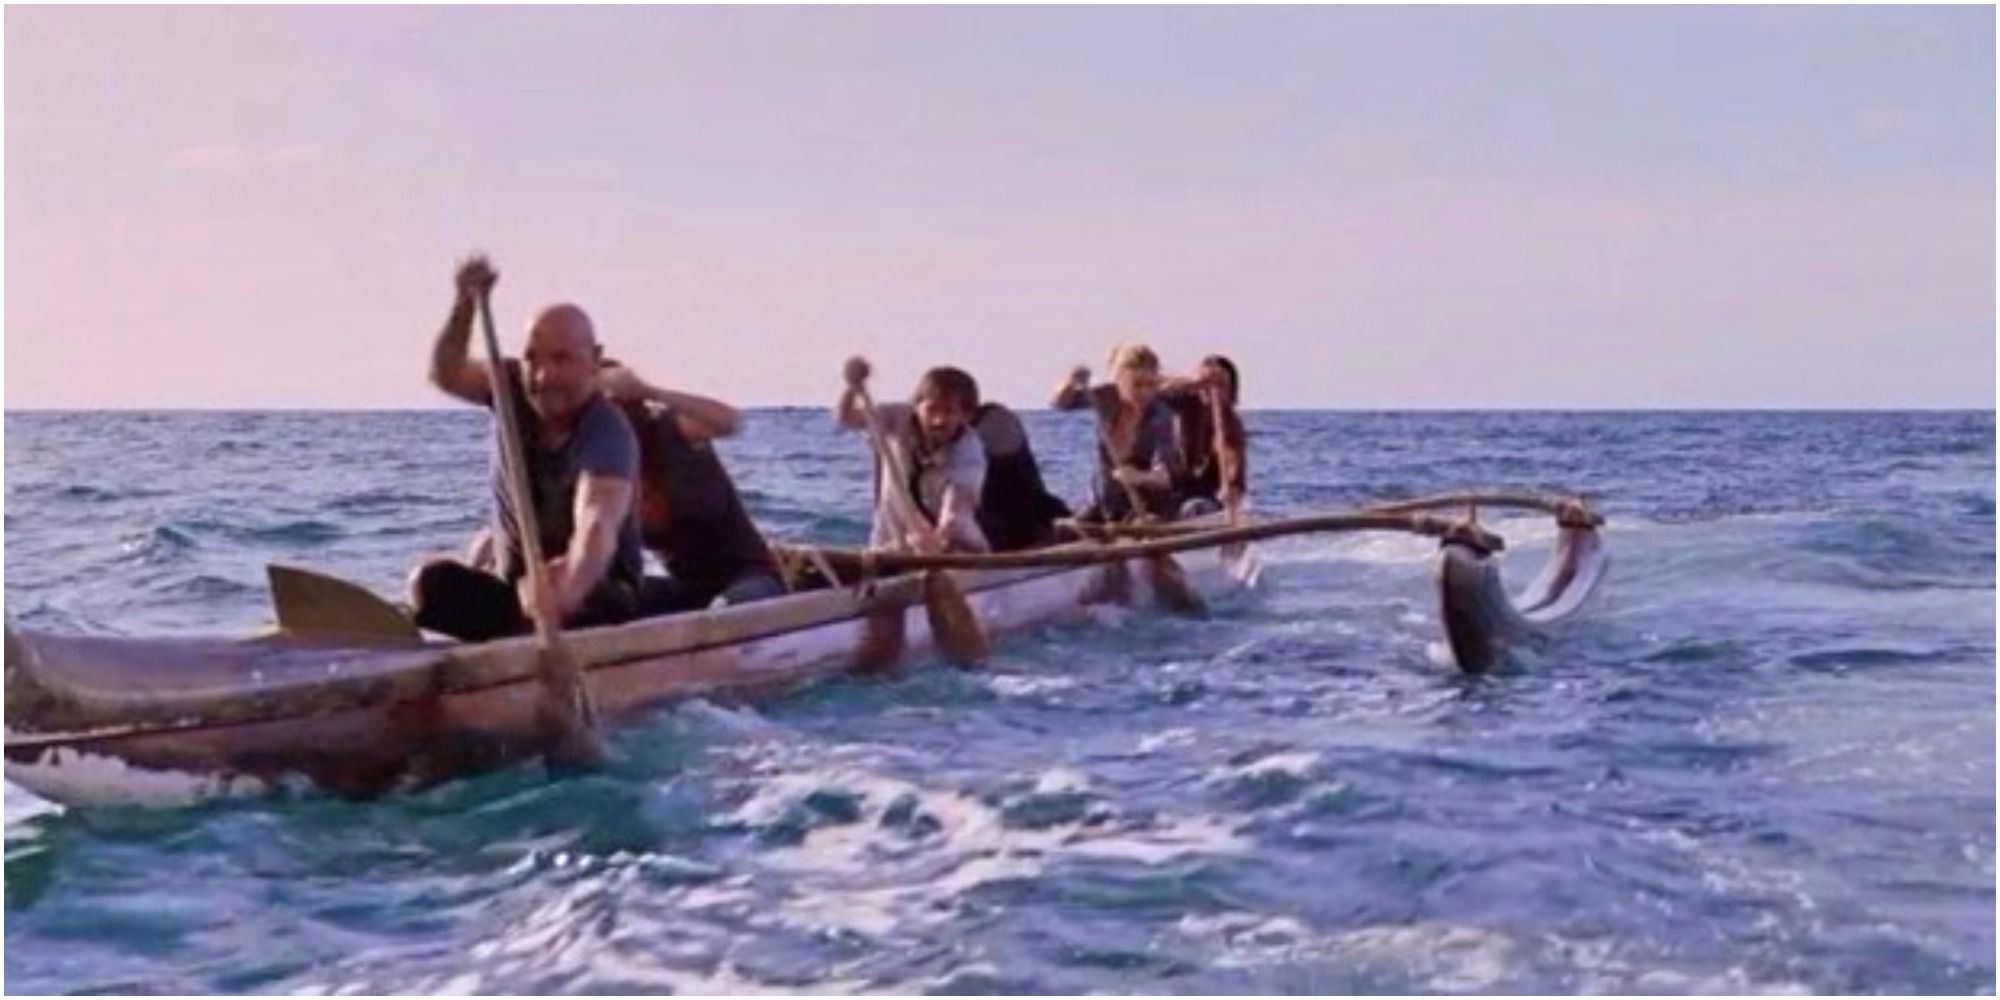 On Lost, who was in the other outrigger shooting at our heroes.